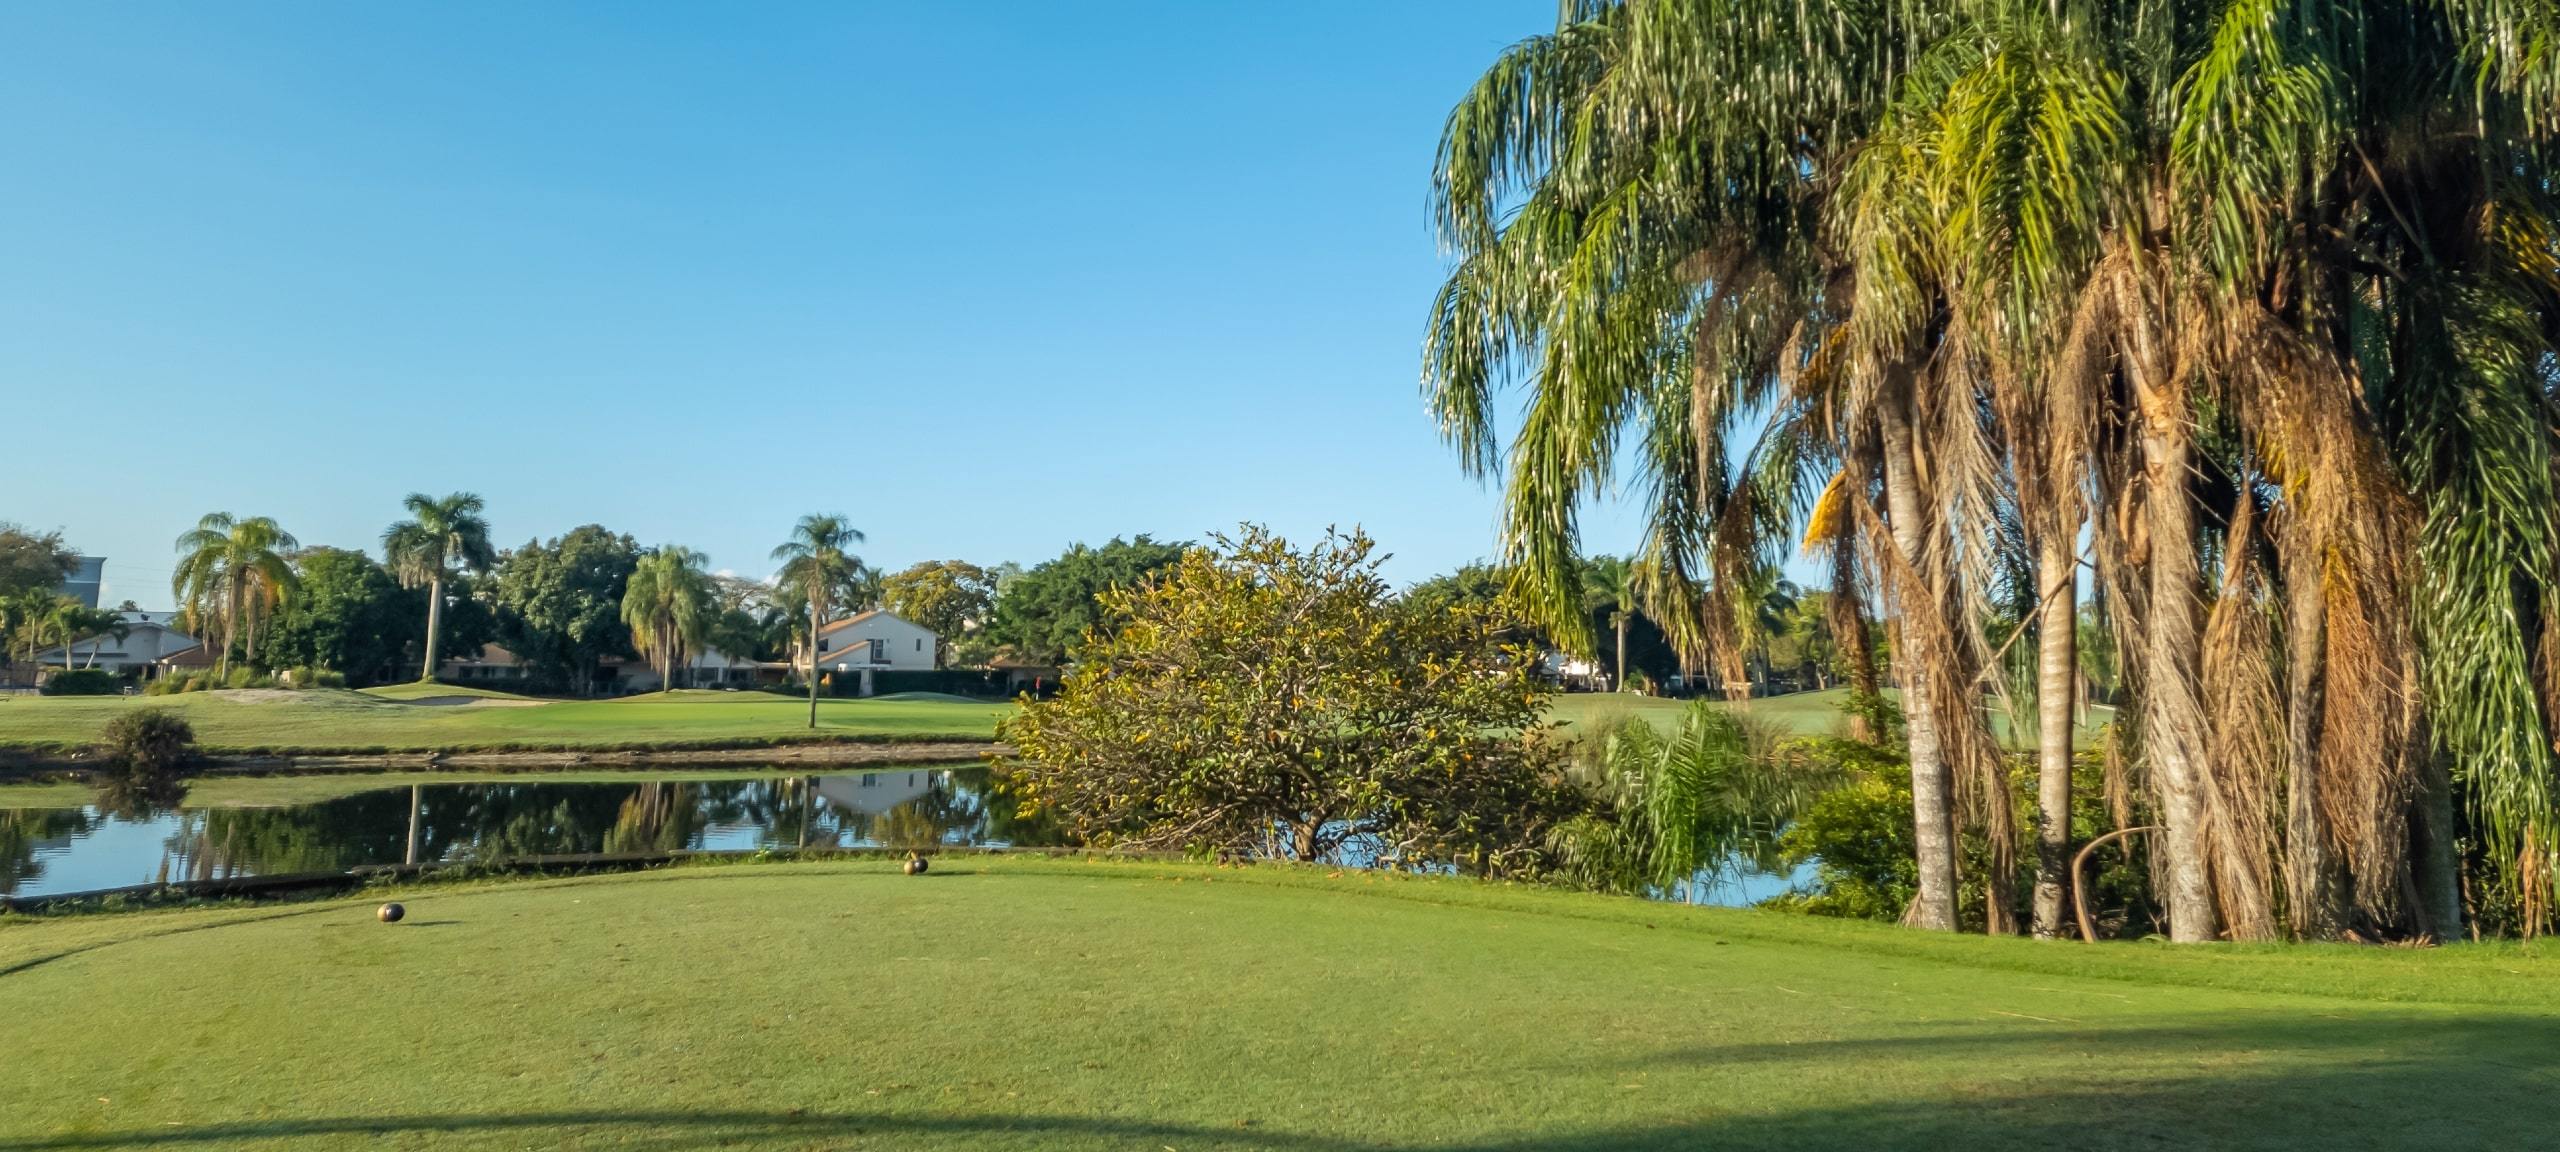 View of golf course in Florida area